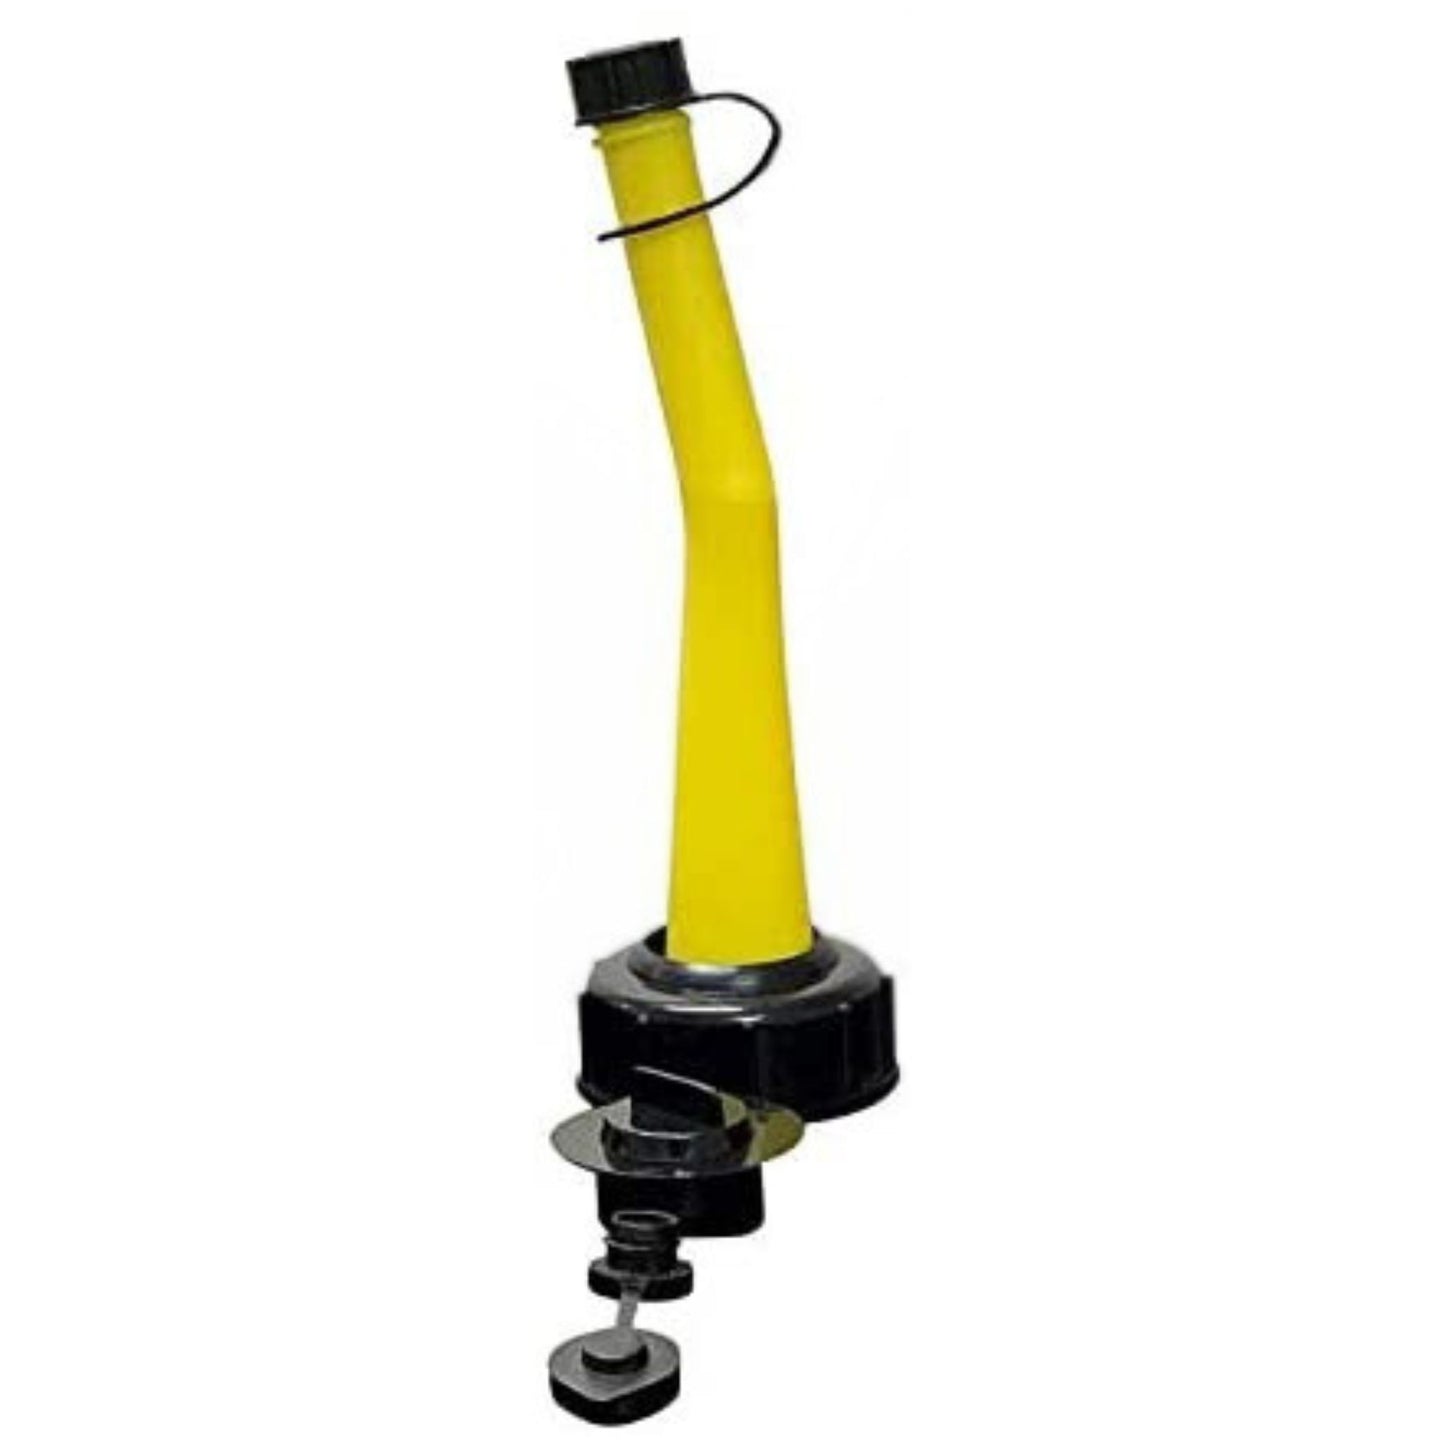 KP KOOL PRODUCTS Aftermarket Pre-Ban Chilton/Vintage Craftsman Nozzles (1 Yellow Color) with Gas Screw Cap, Gasket, Stopper Cap and Vent Cap. Your Can opening outer Dia: 2.0 inches for this to fit.